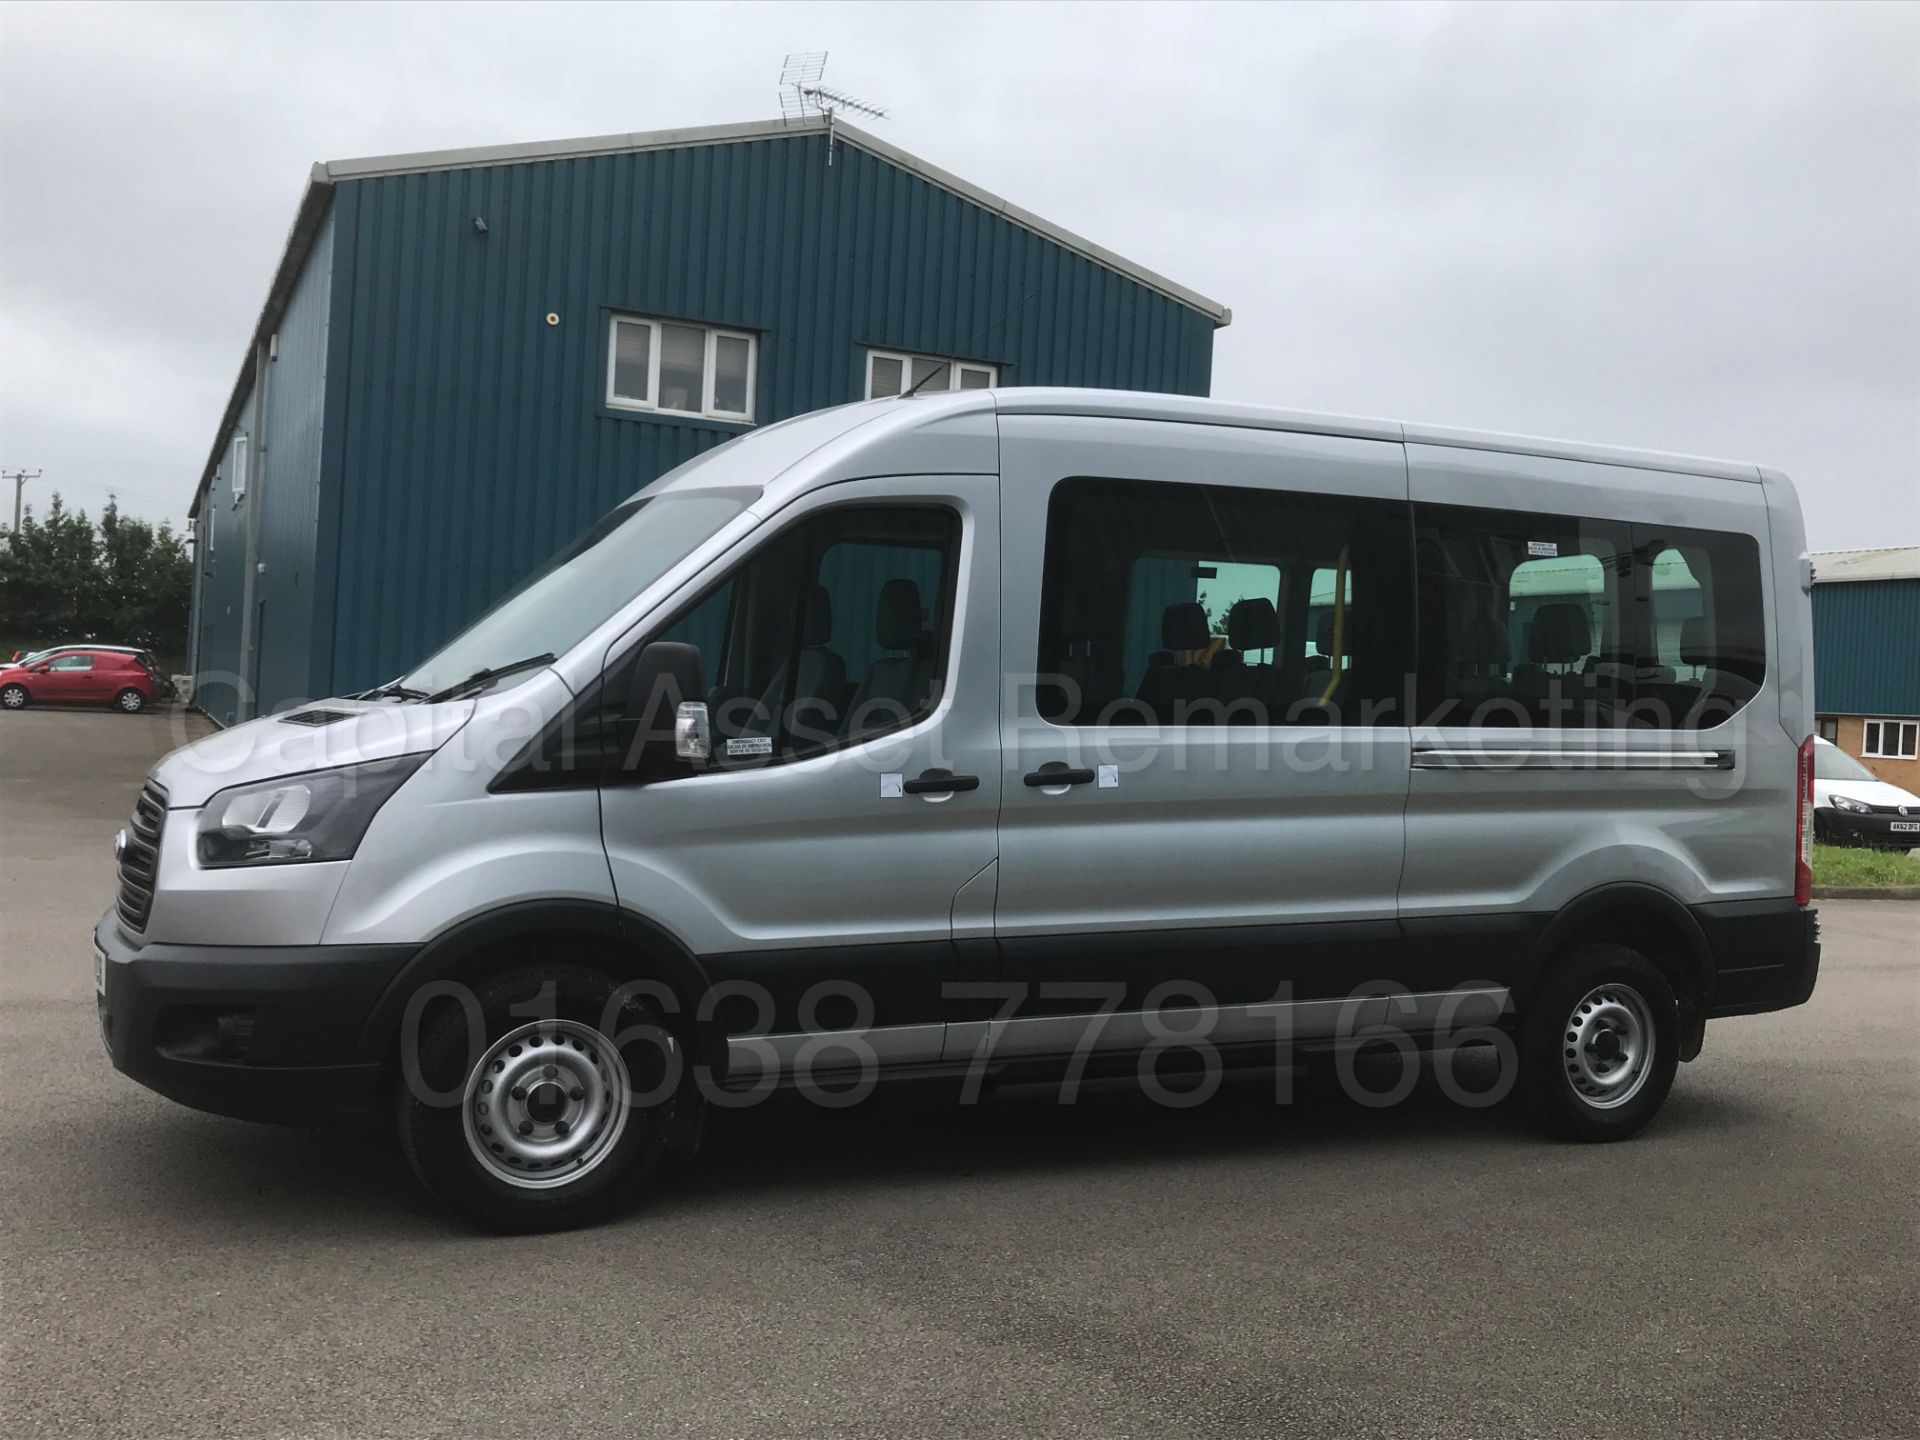 (On Sale) FORD TRANSIT LWB '15 SEATER MINI-BUS' (2018) '2.2 TDCI -125 BHP- 6 SPEED' 130 MILES ONLY ! - Image 8 of 50